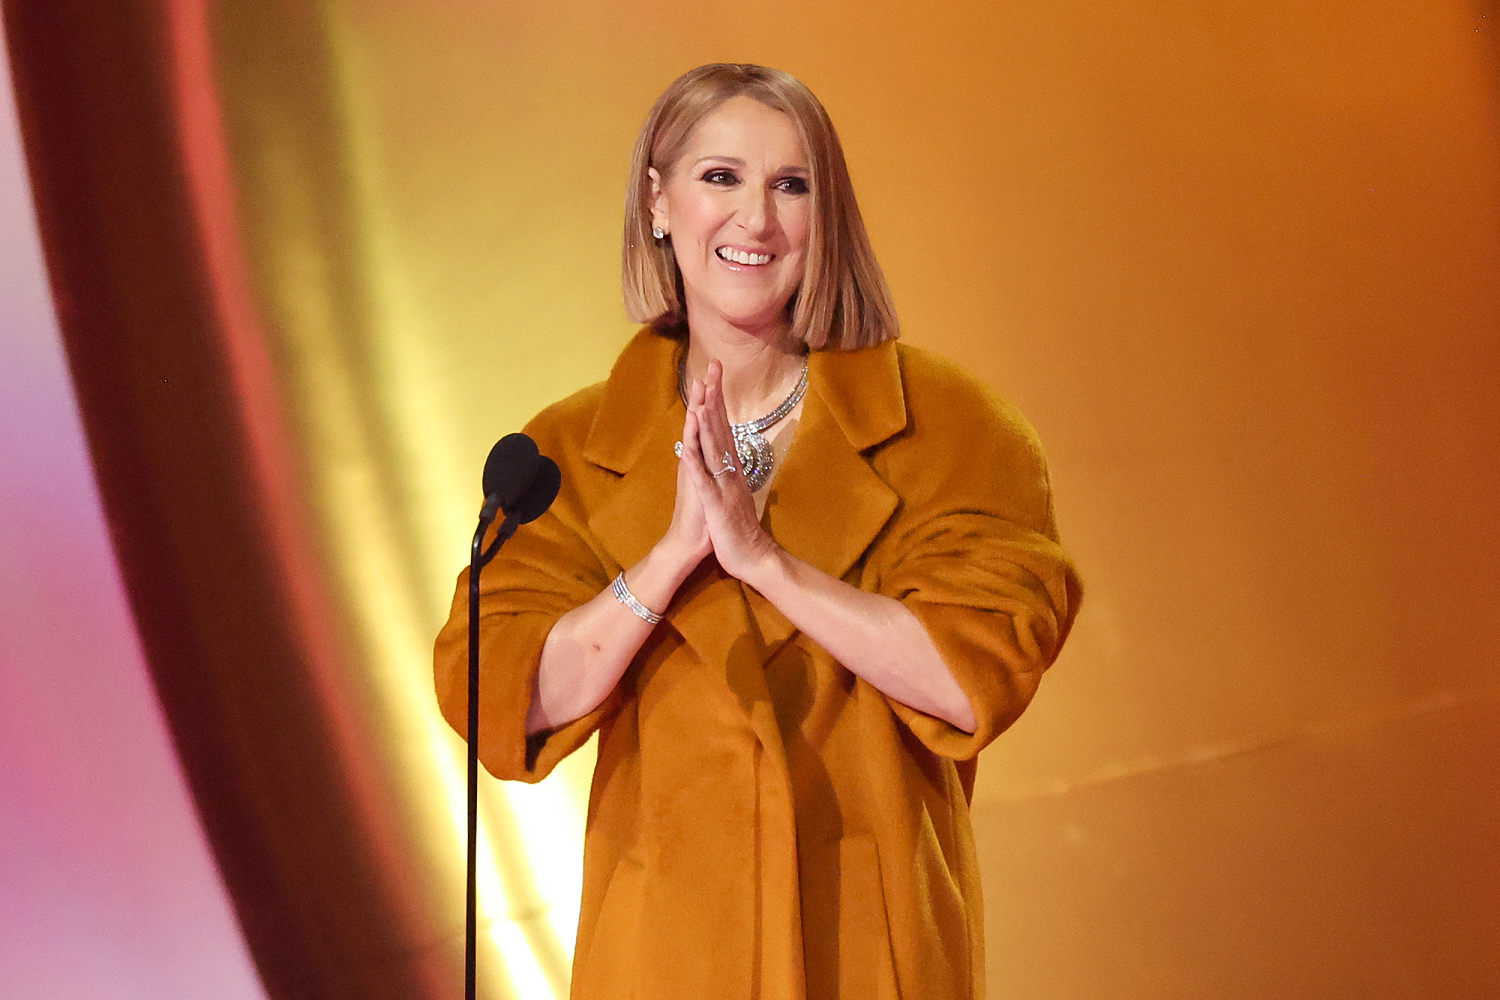 Critics used to laugh at Celine Dion. Here's how she turned the tables.